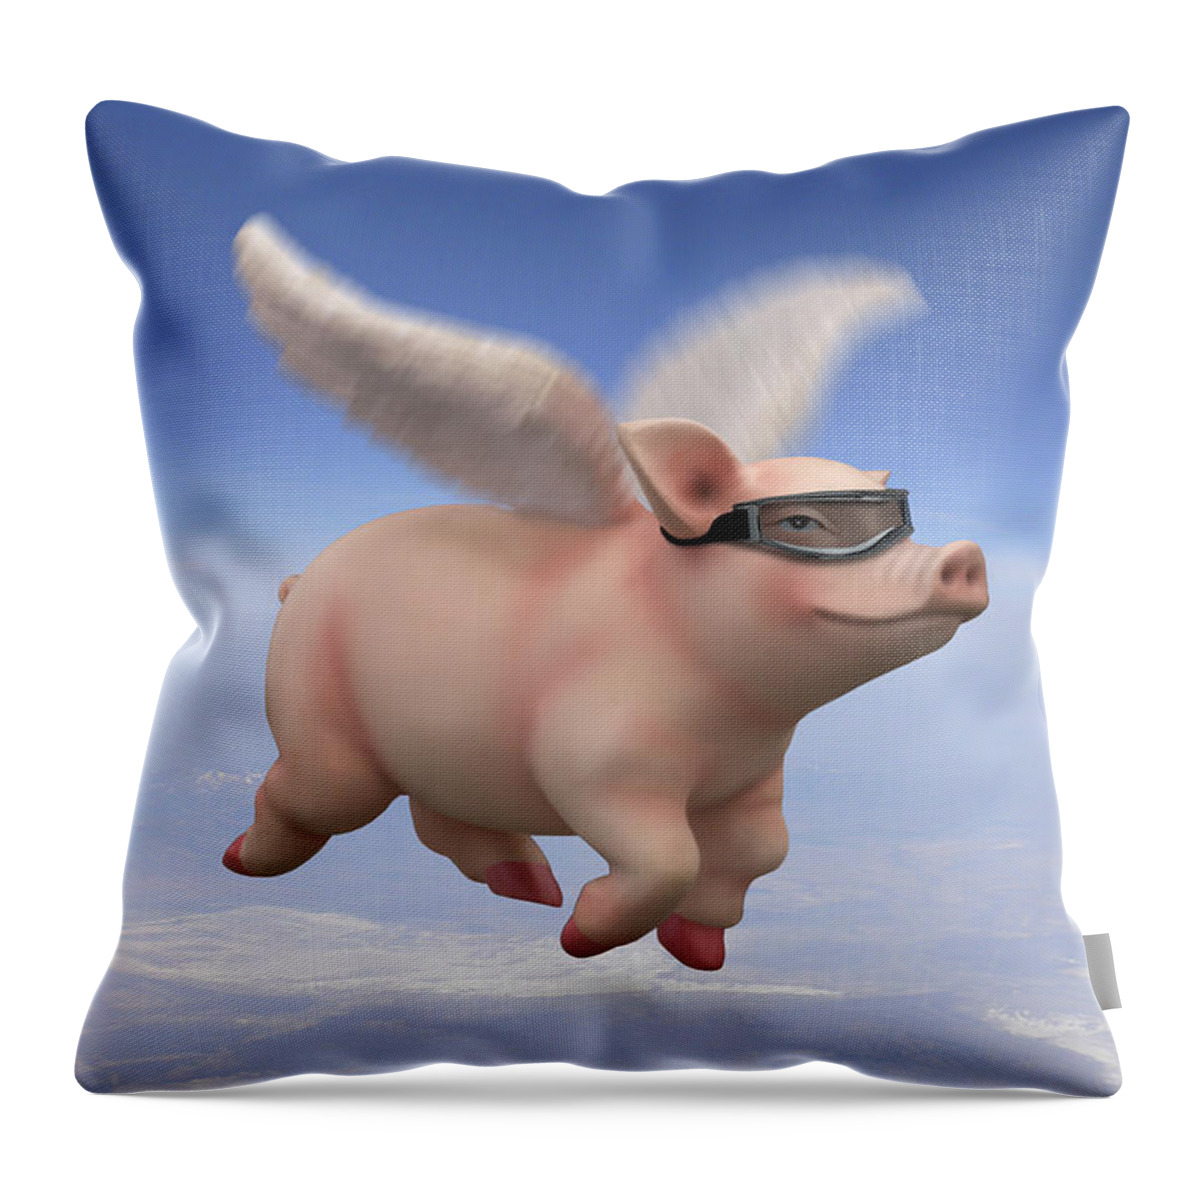 Pigs Fly Throw Pillow featuring the photograph Pigs Fly 1 by Mike McGlothlen